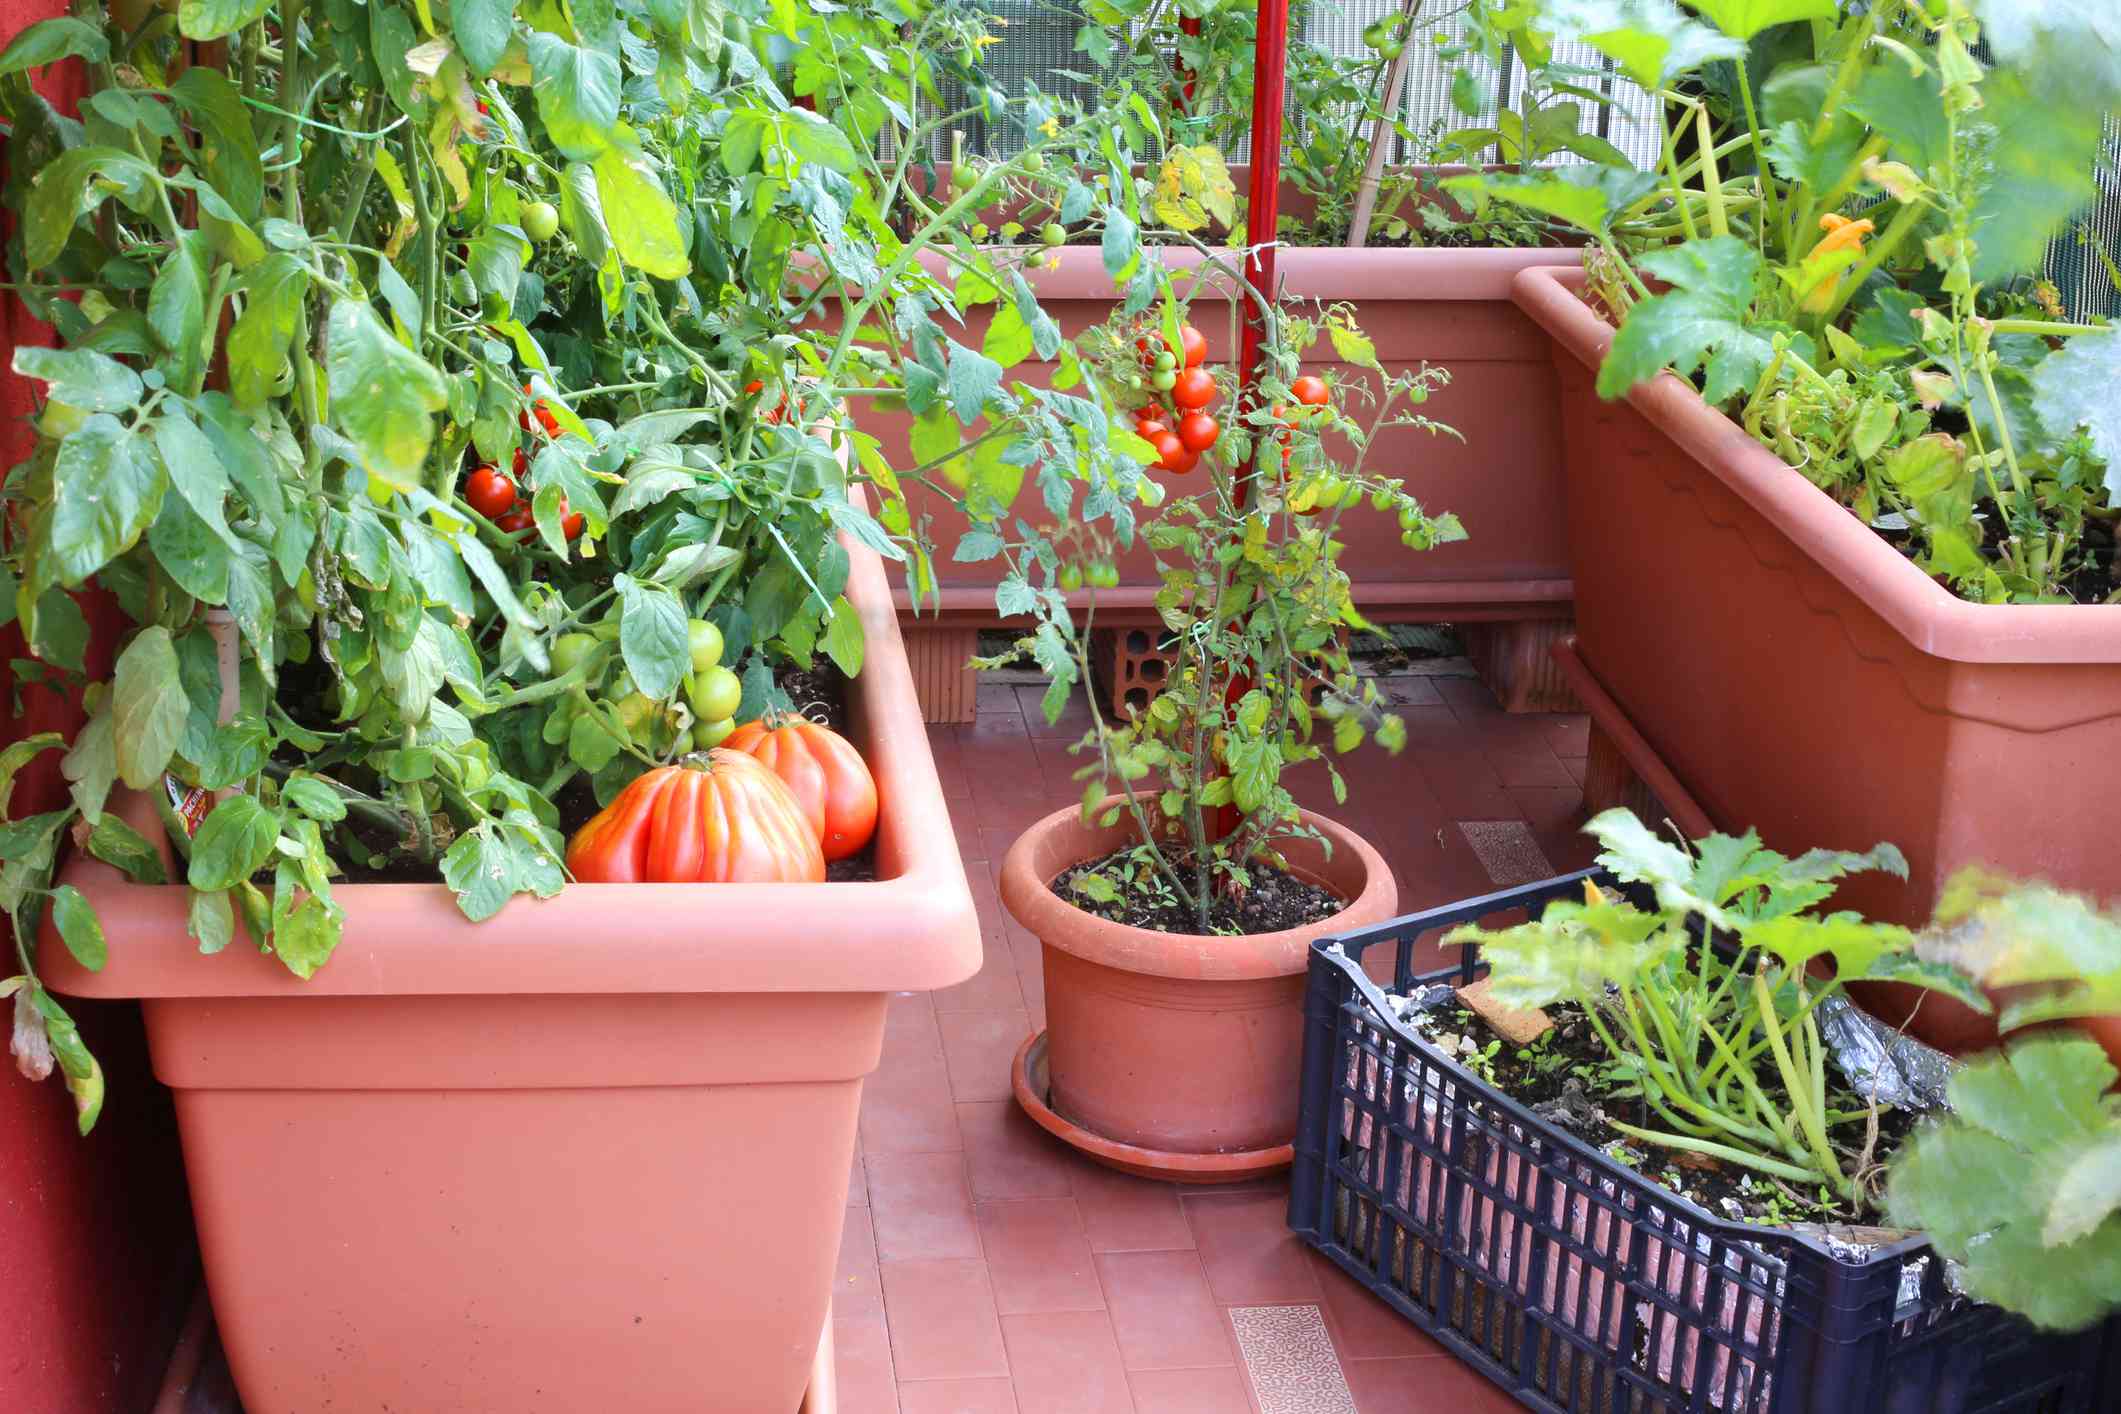 Should You Really Use Coffee Grounds for Tomato Plants? What to Know